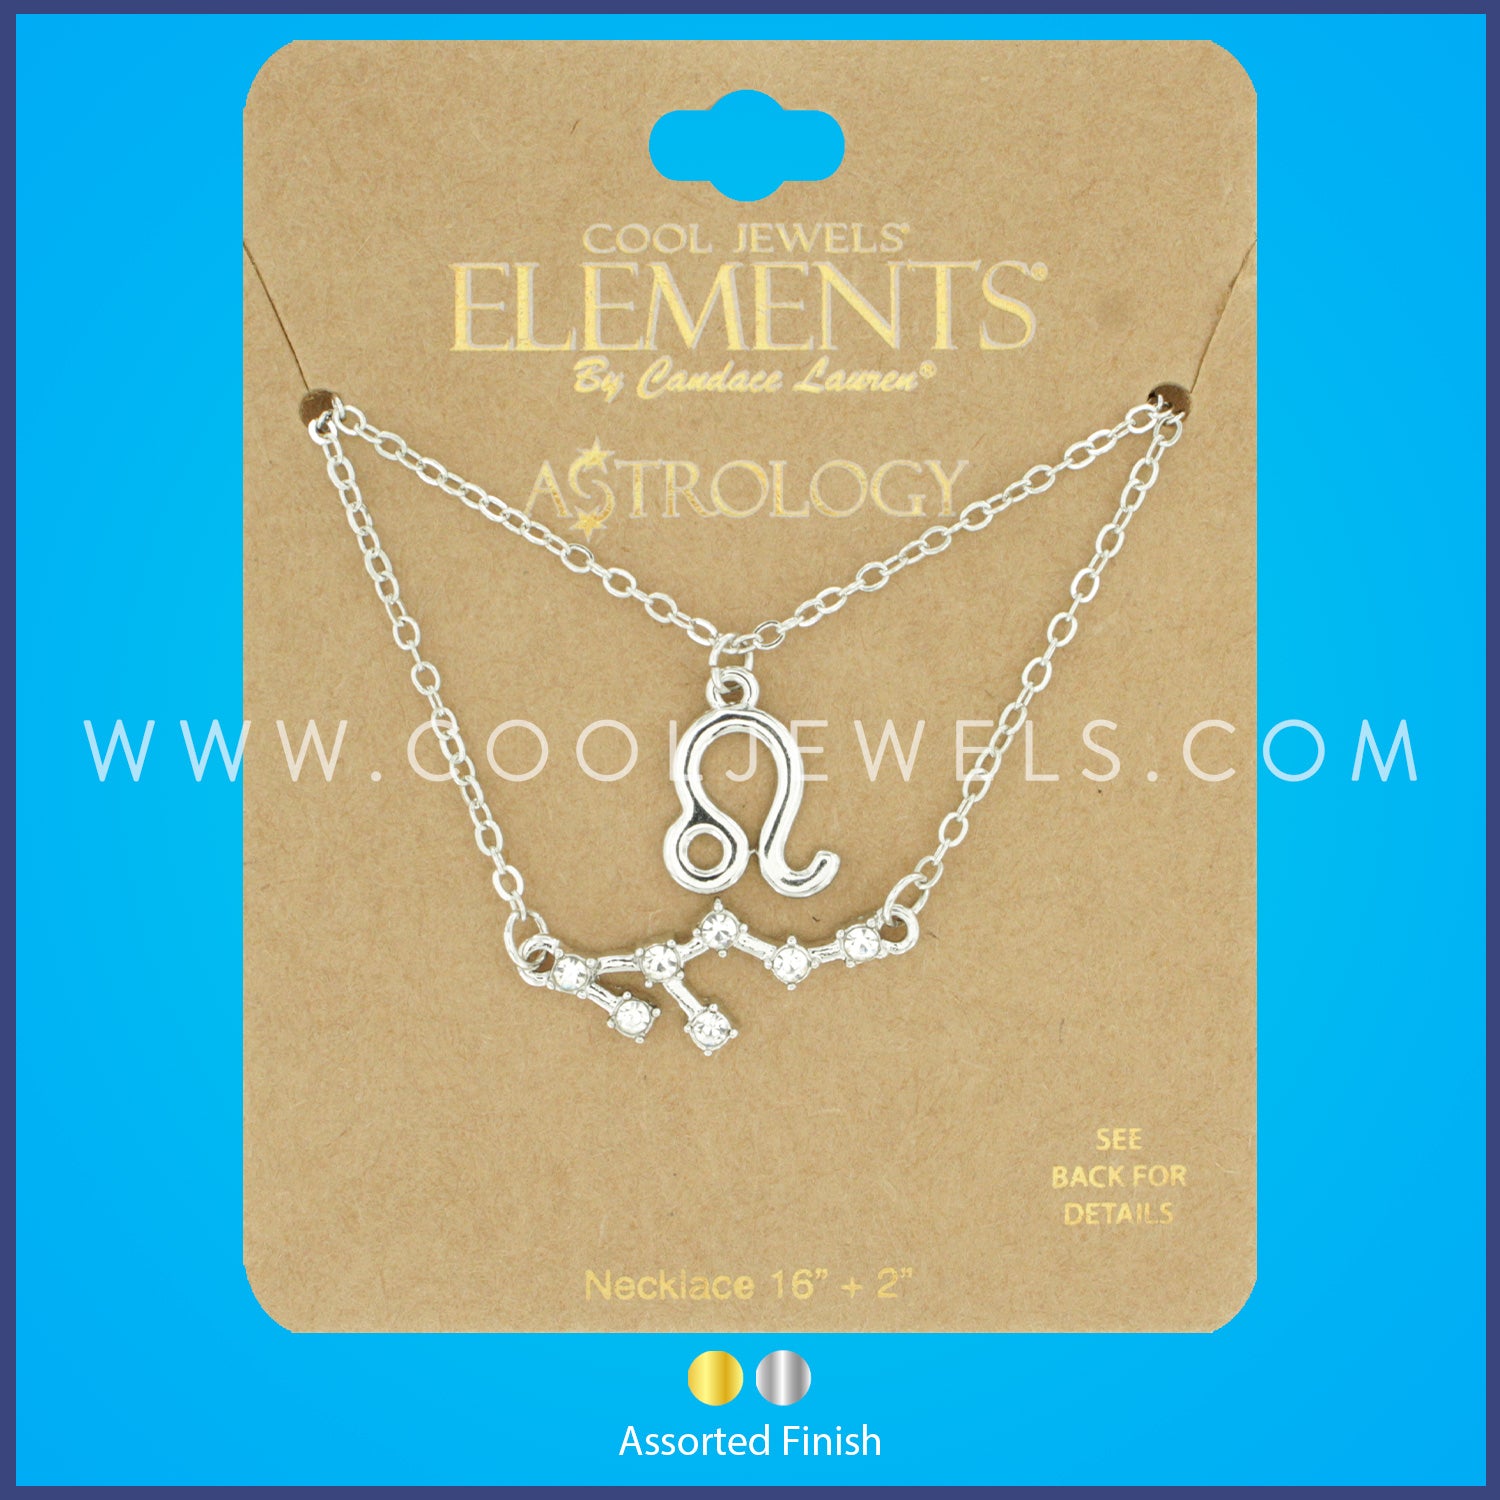 (SET OF 2) LINK CHAIN NECKLACE WITH LEO SYMBOL &amp; CONSTELLATION - CARDED